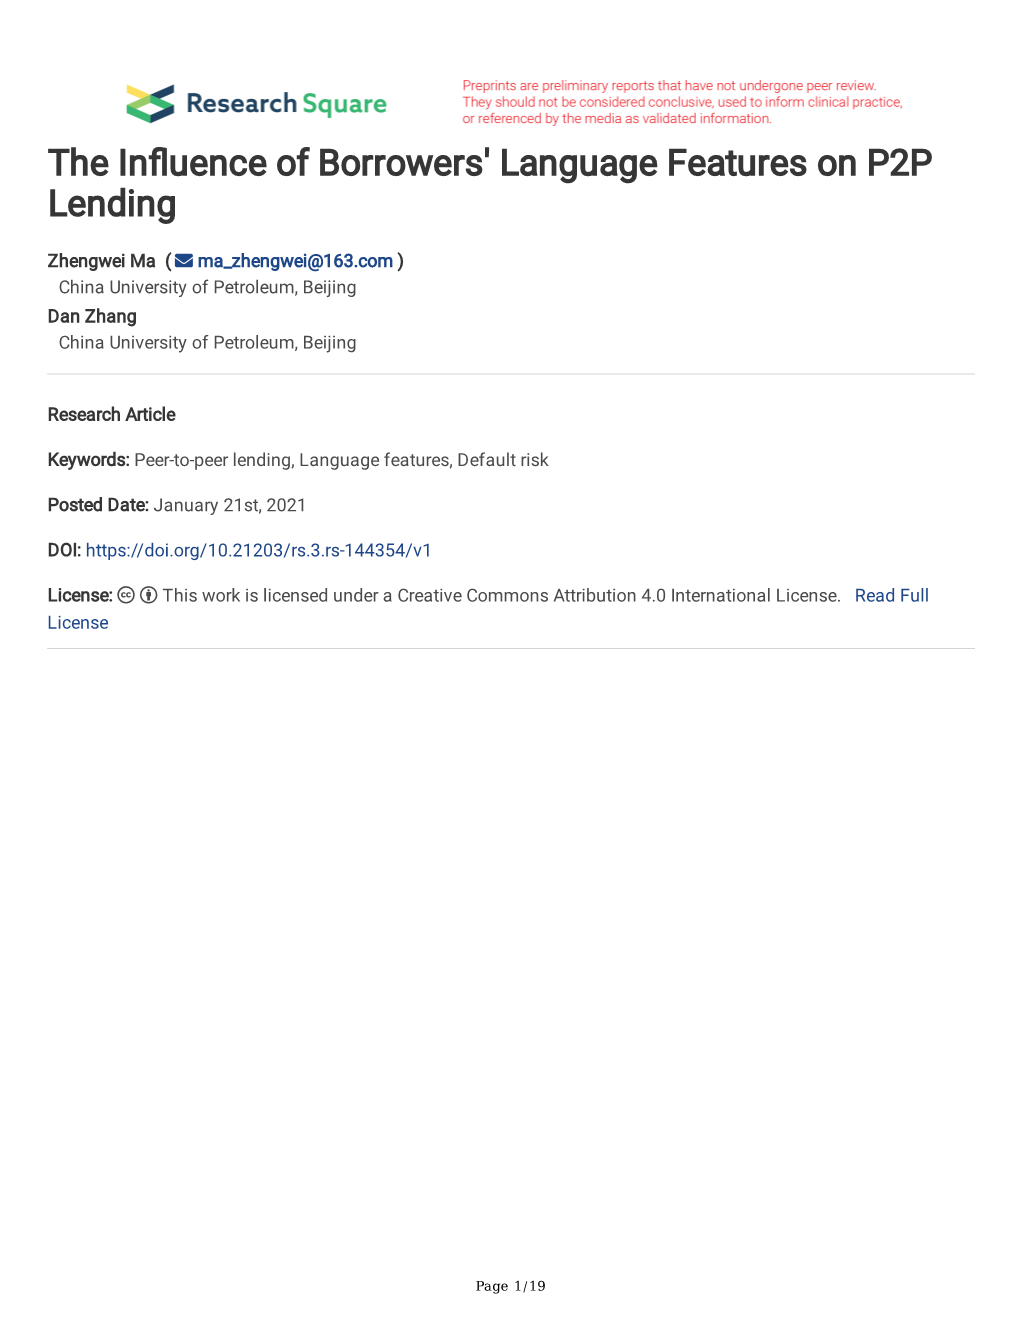 The in Uence of Borrowers' Language Features on P2P Lending